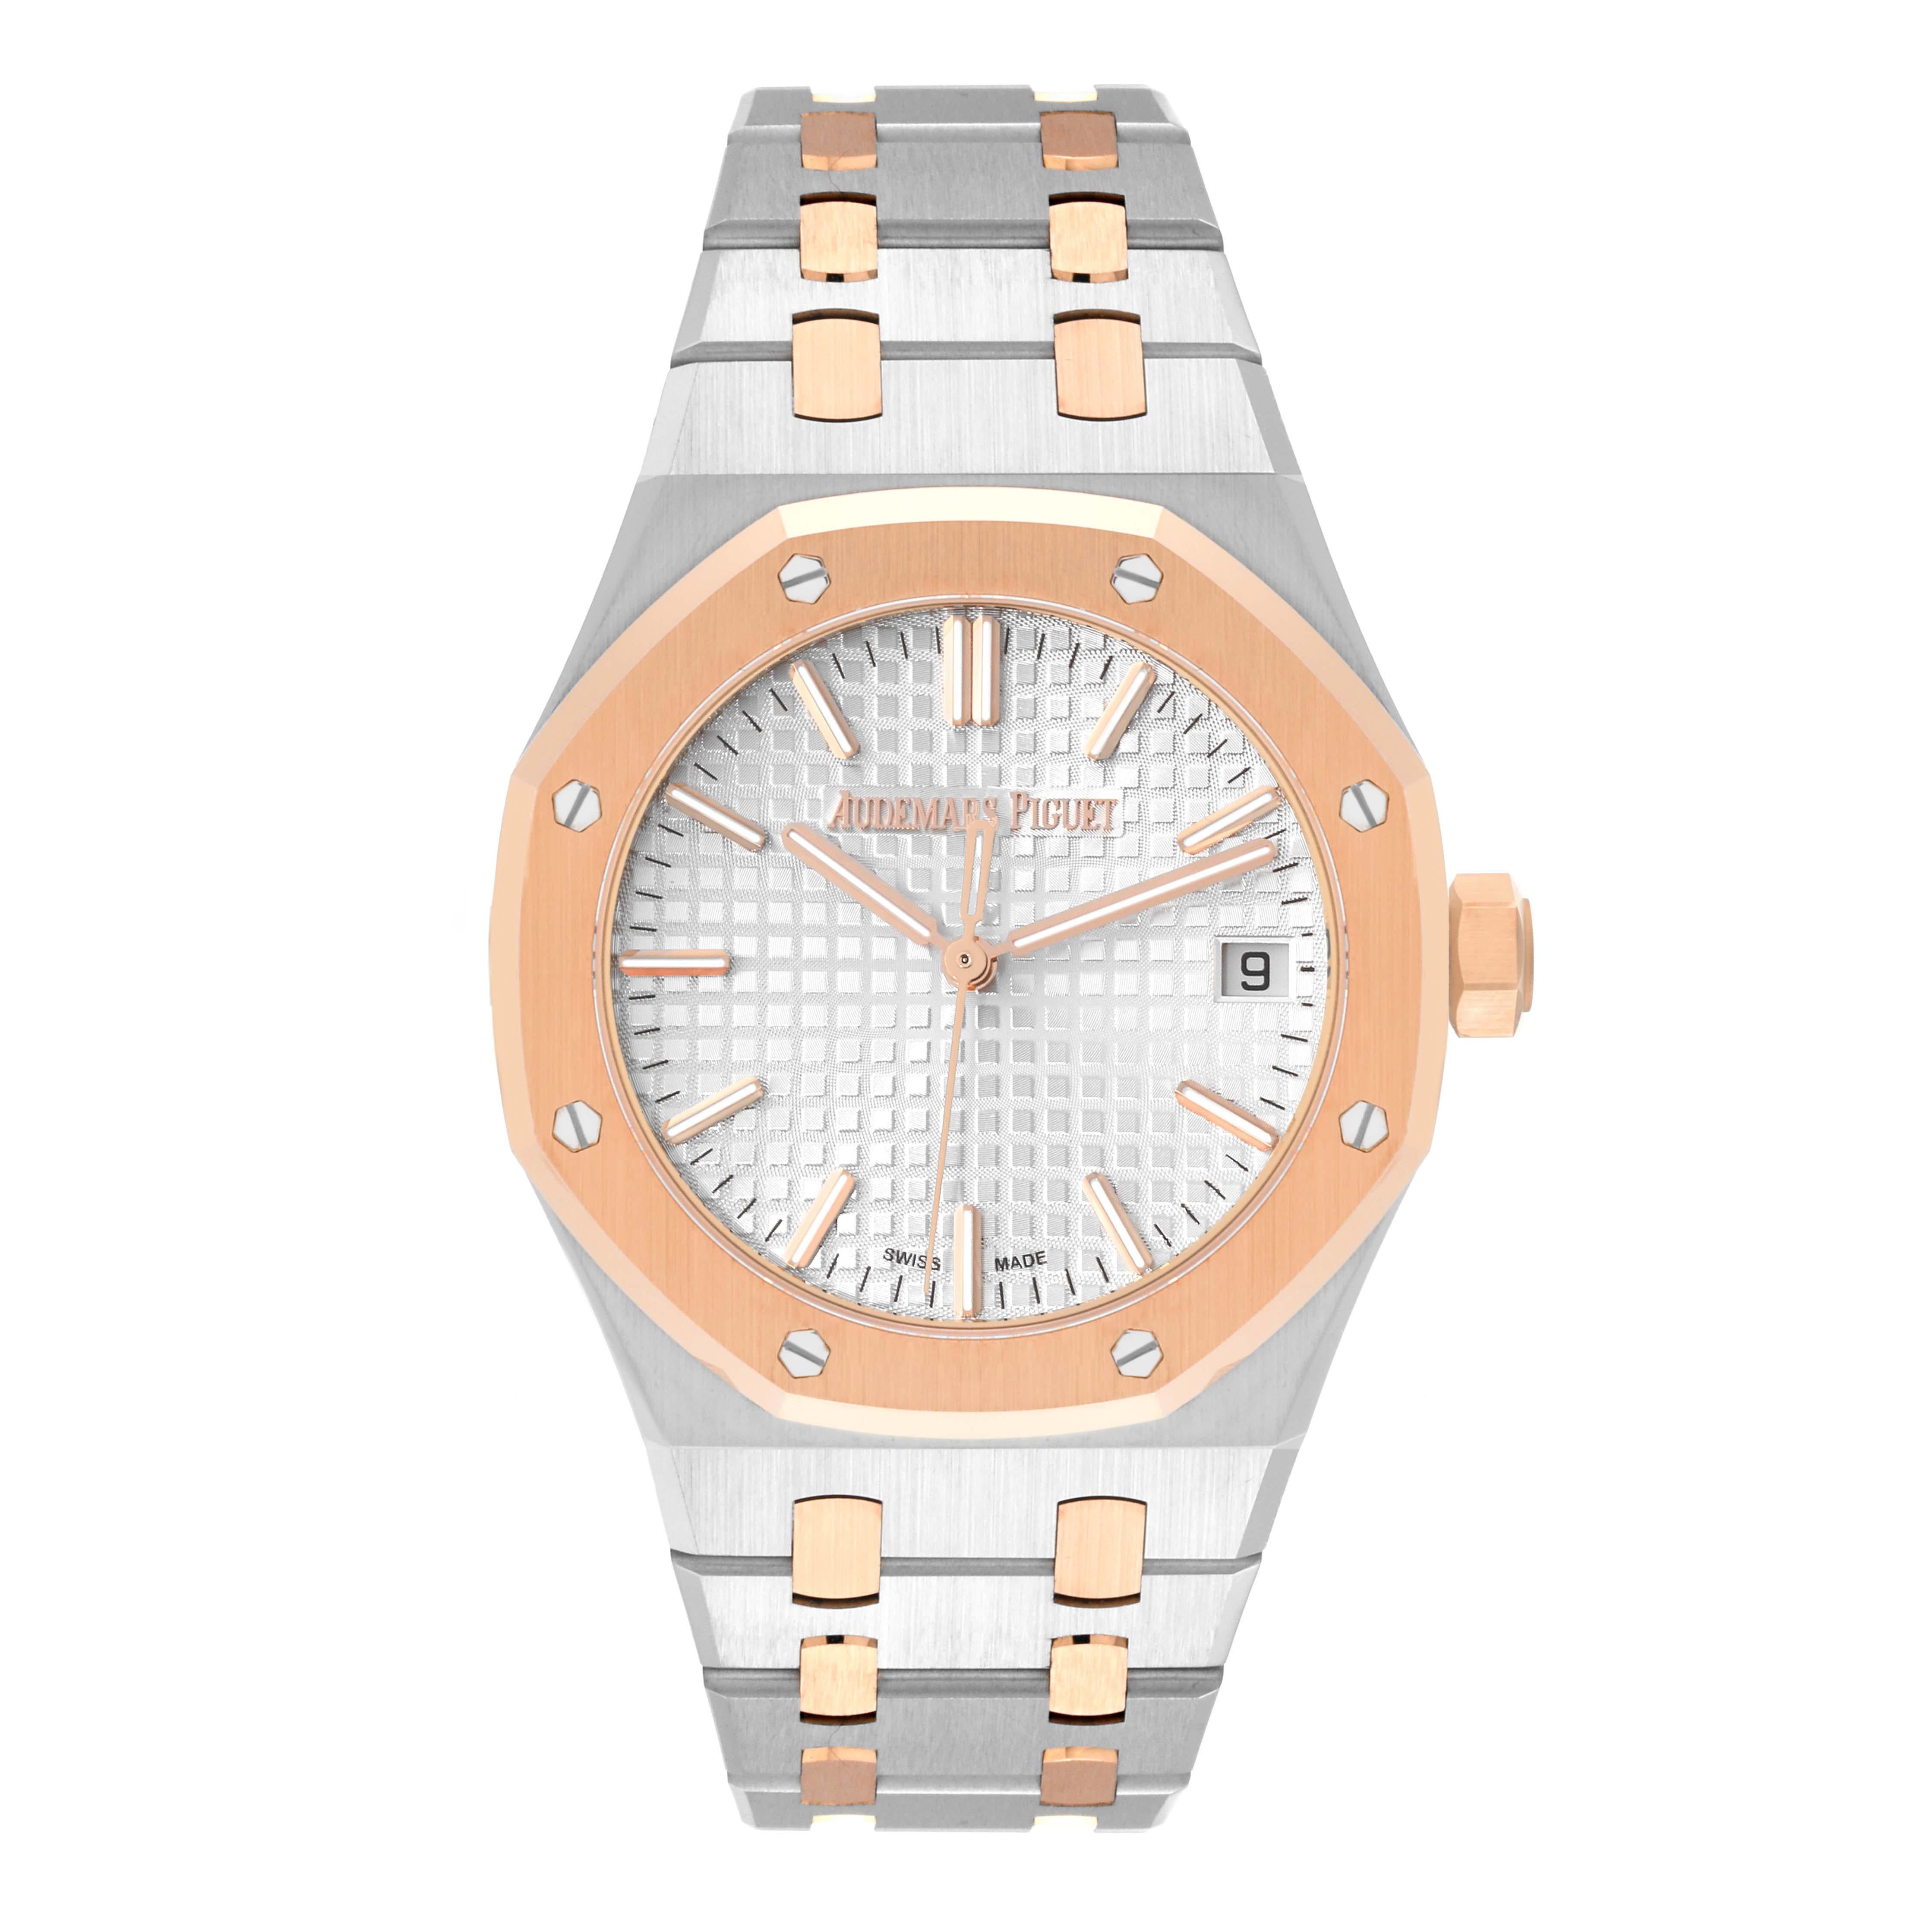 Audemars Piguet Royal Oak Midsize Steel Rose Gold Mens Watch 15550SR Box Card. Automatic self-winding movement. Brushed stainless steel case with polished bevel edges 37.0 mm in diameter. Case thickness 9 mm. Exhibition transparent sapphire crystal